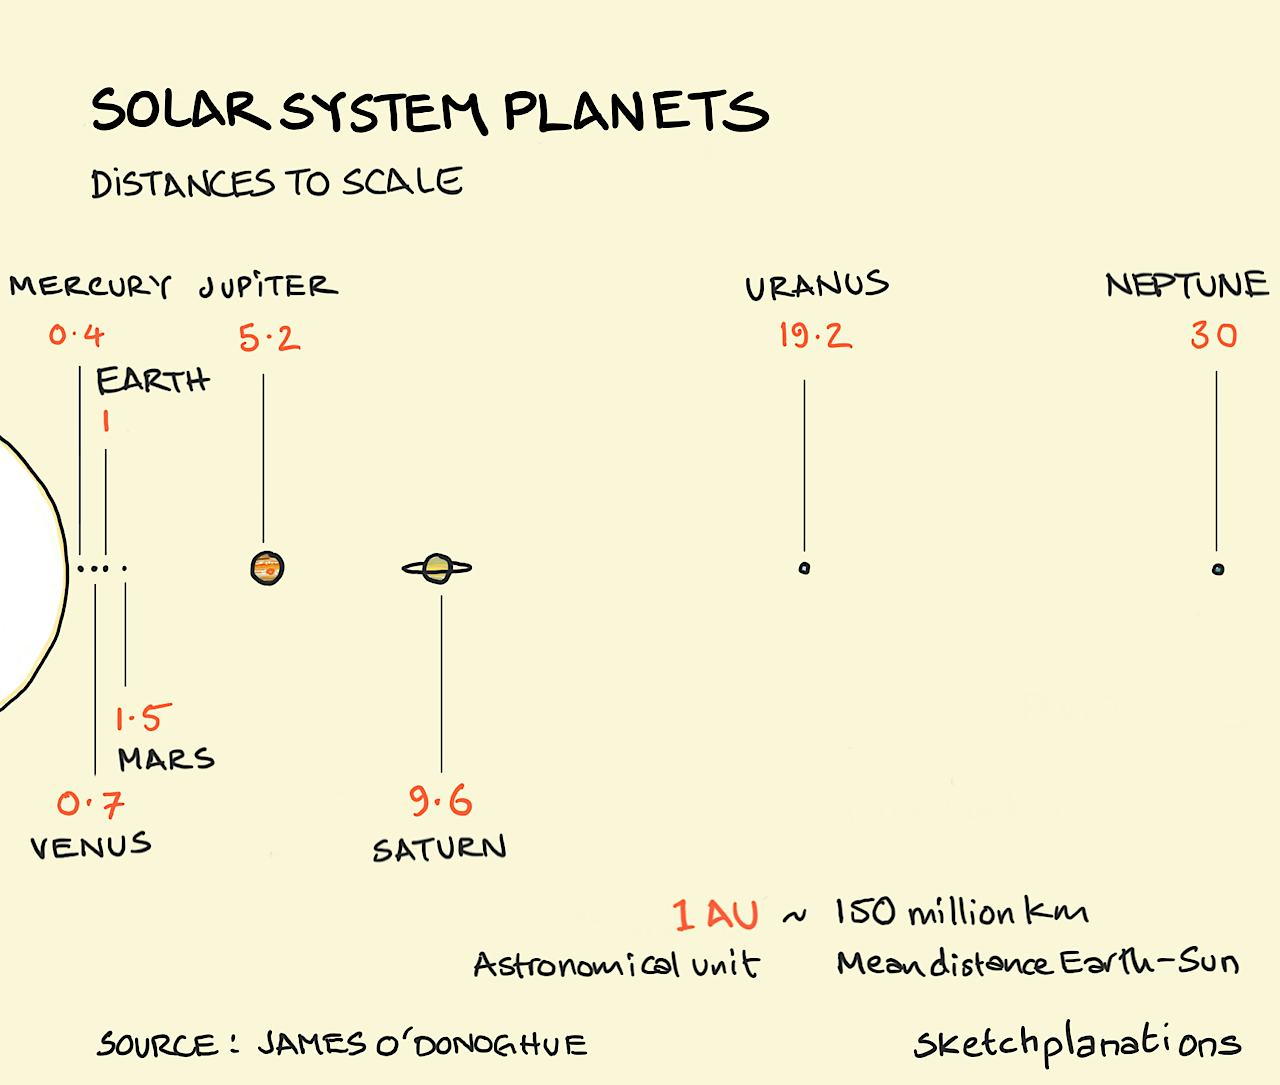 Solar system planets — distances to scale - Sketchplanations